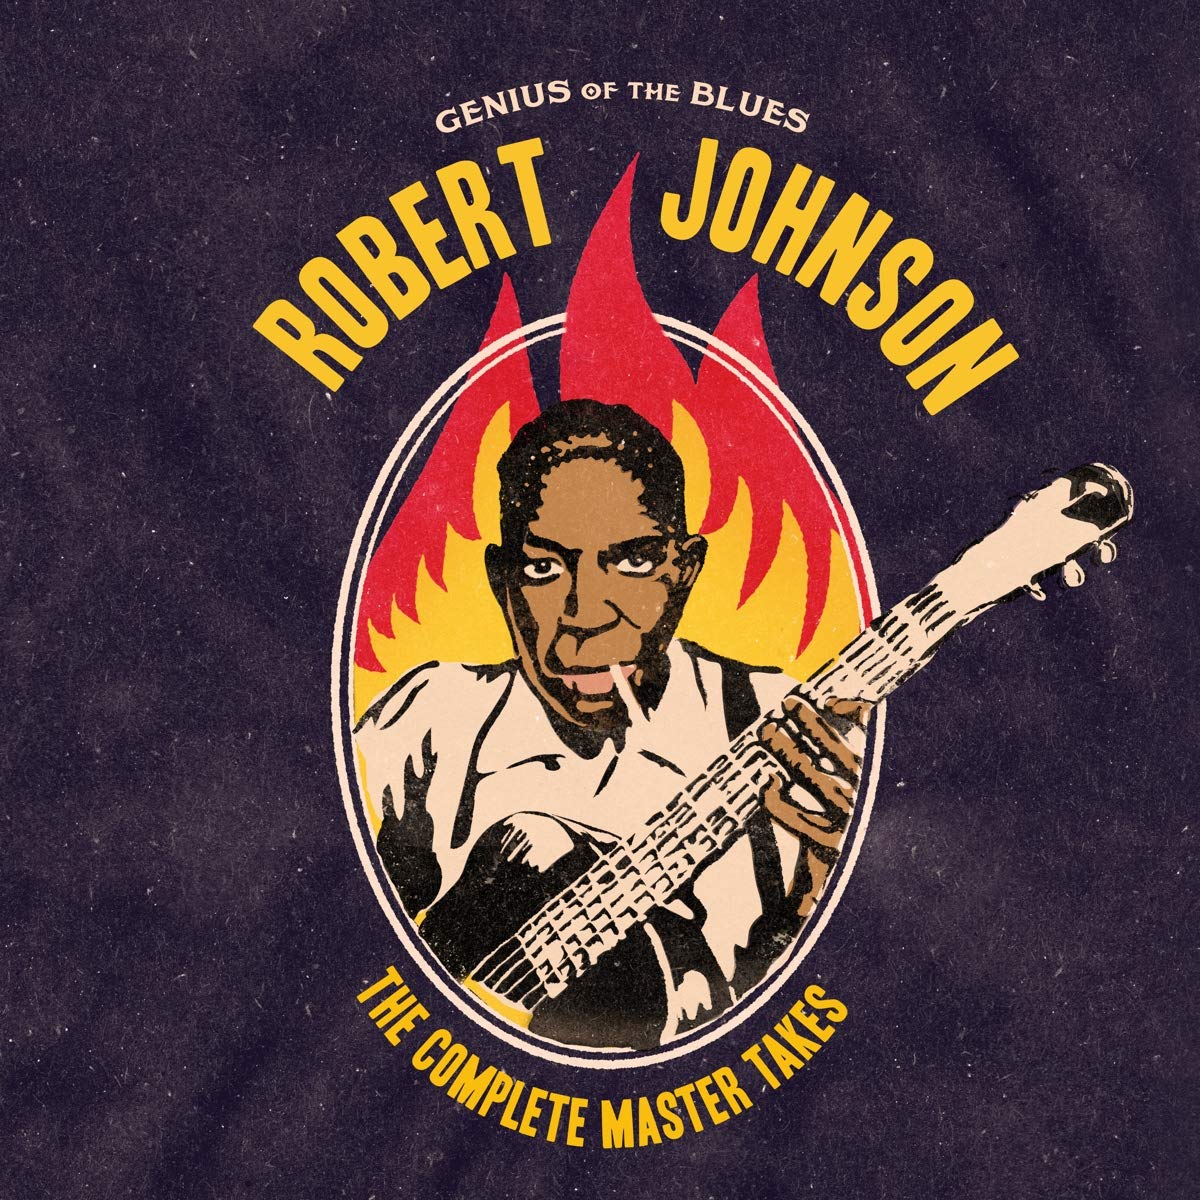 Robert Johnson - Genius Of The Blues: The Complete Master Tapes (Vinyl)